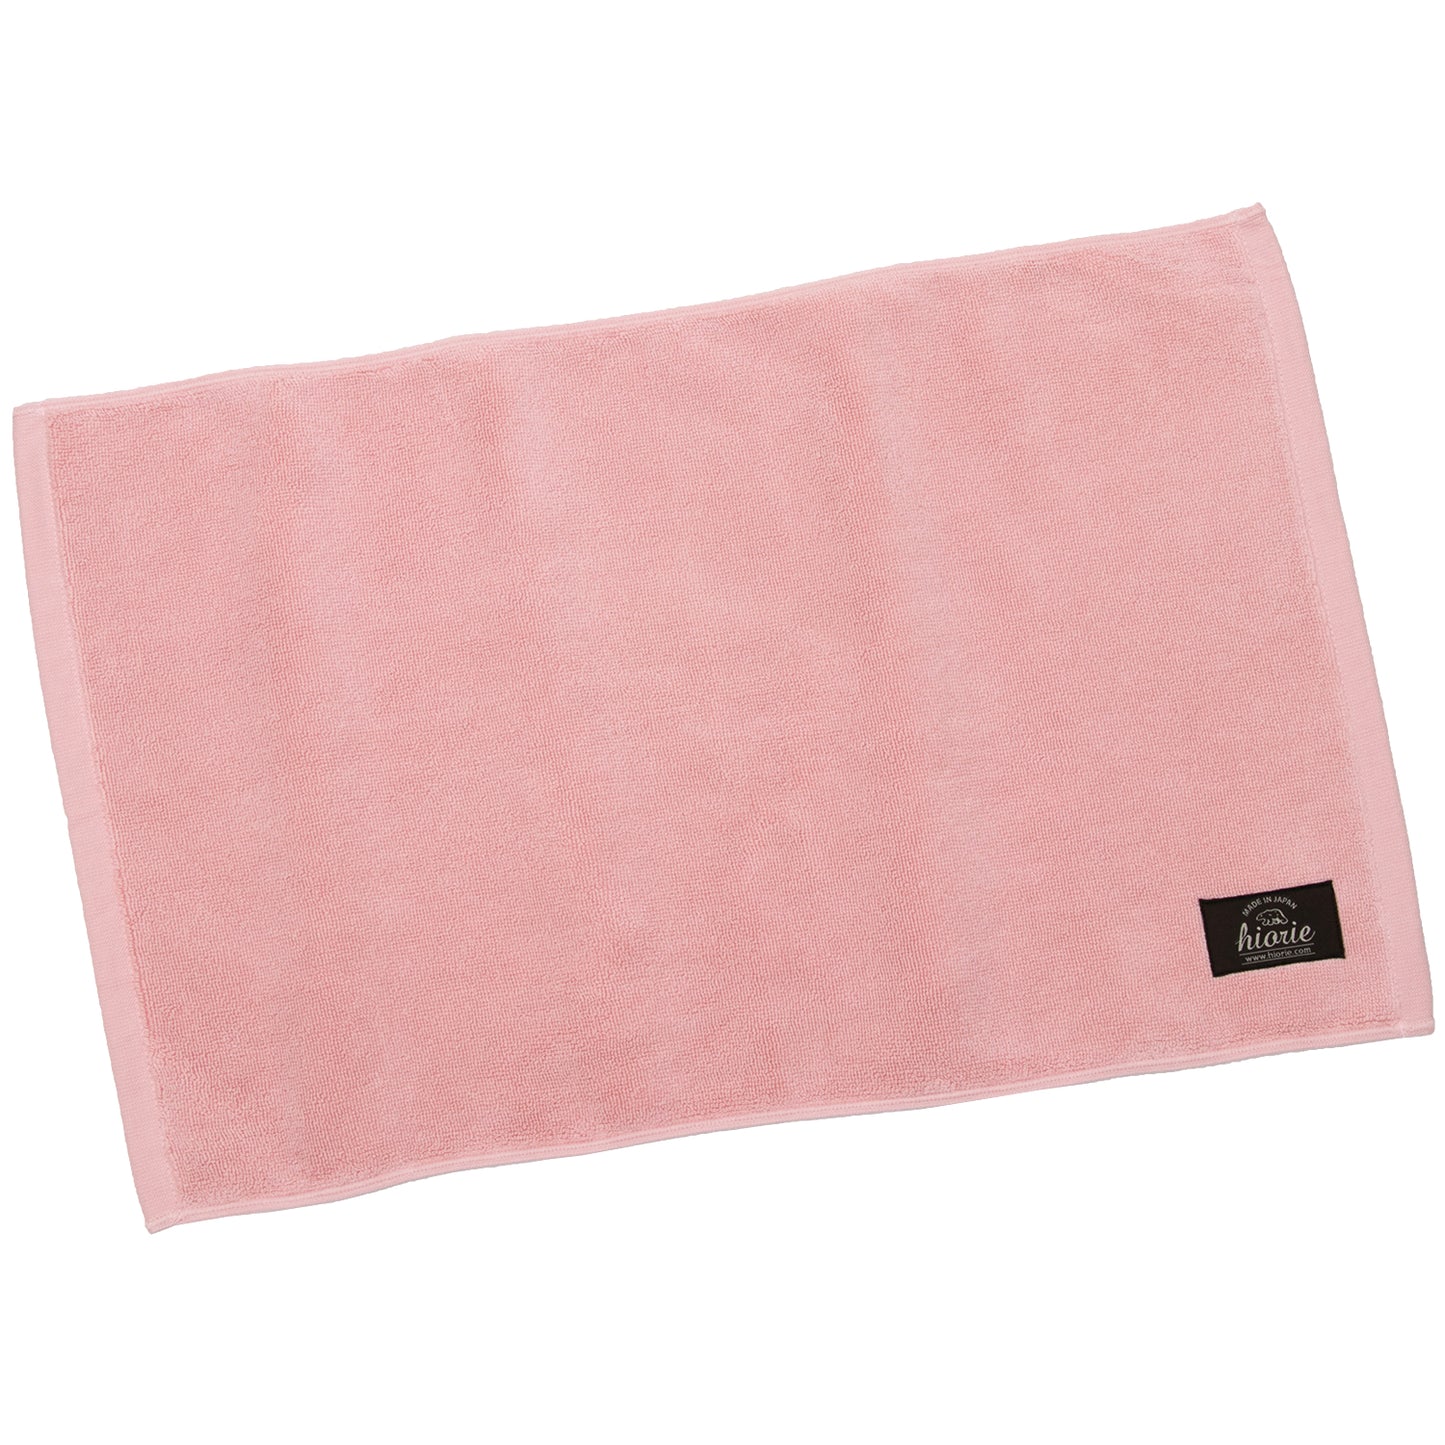 Hiorie Hotel Soft Bactericidal Water-Absorption Bath Mat 1 Sheets Cotton Japan